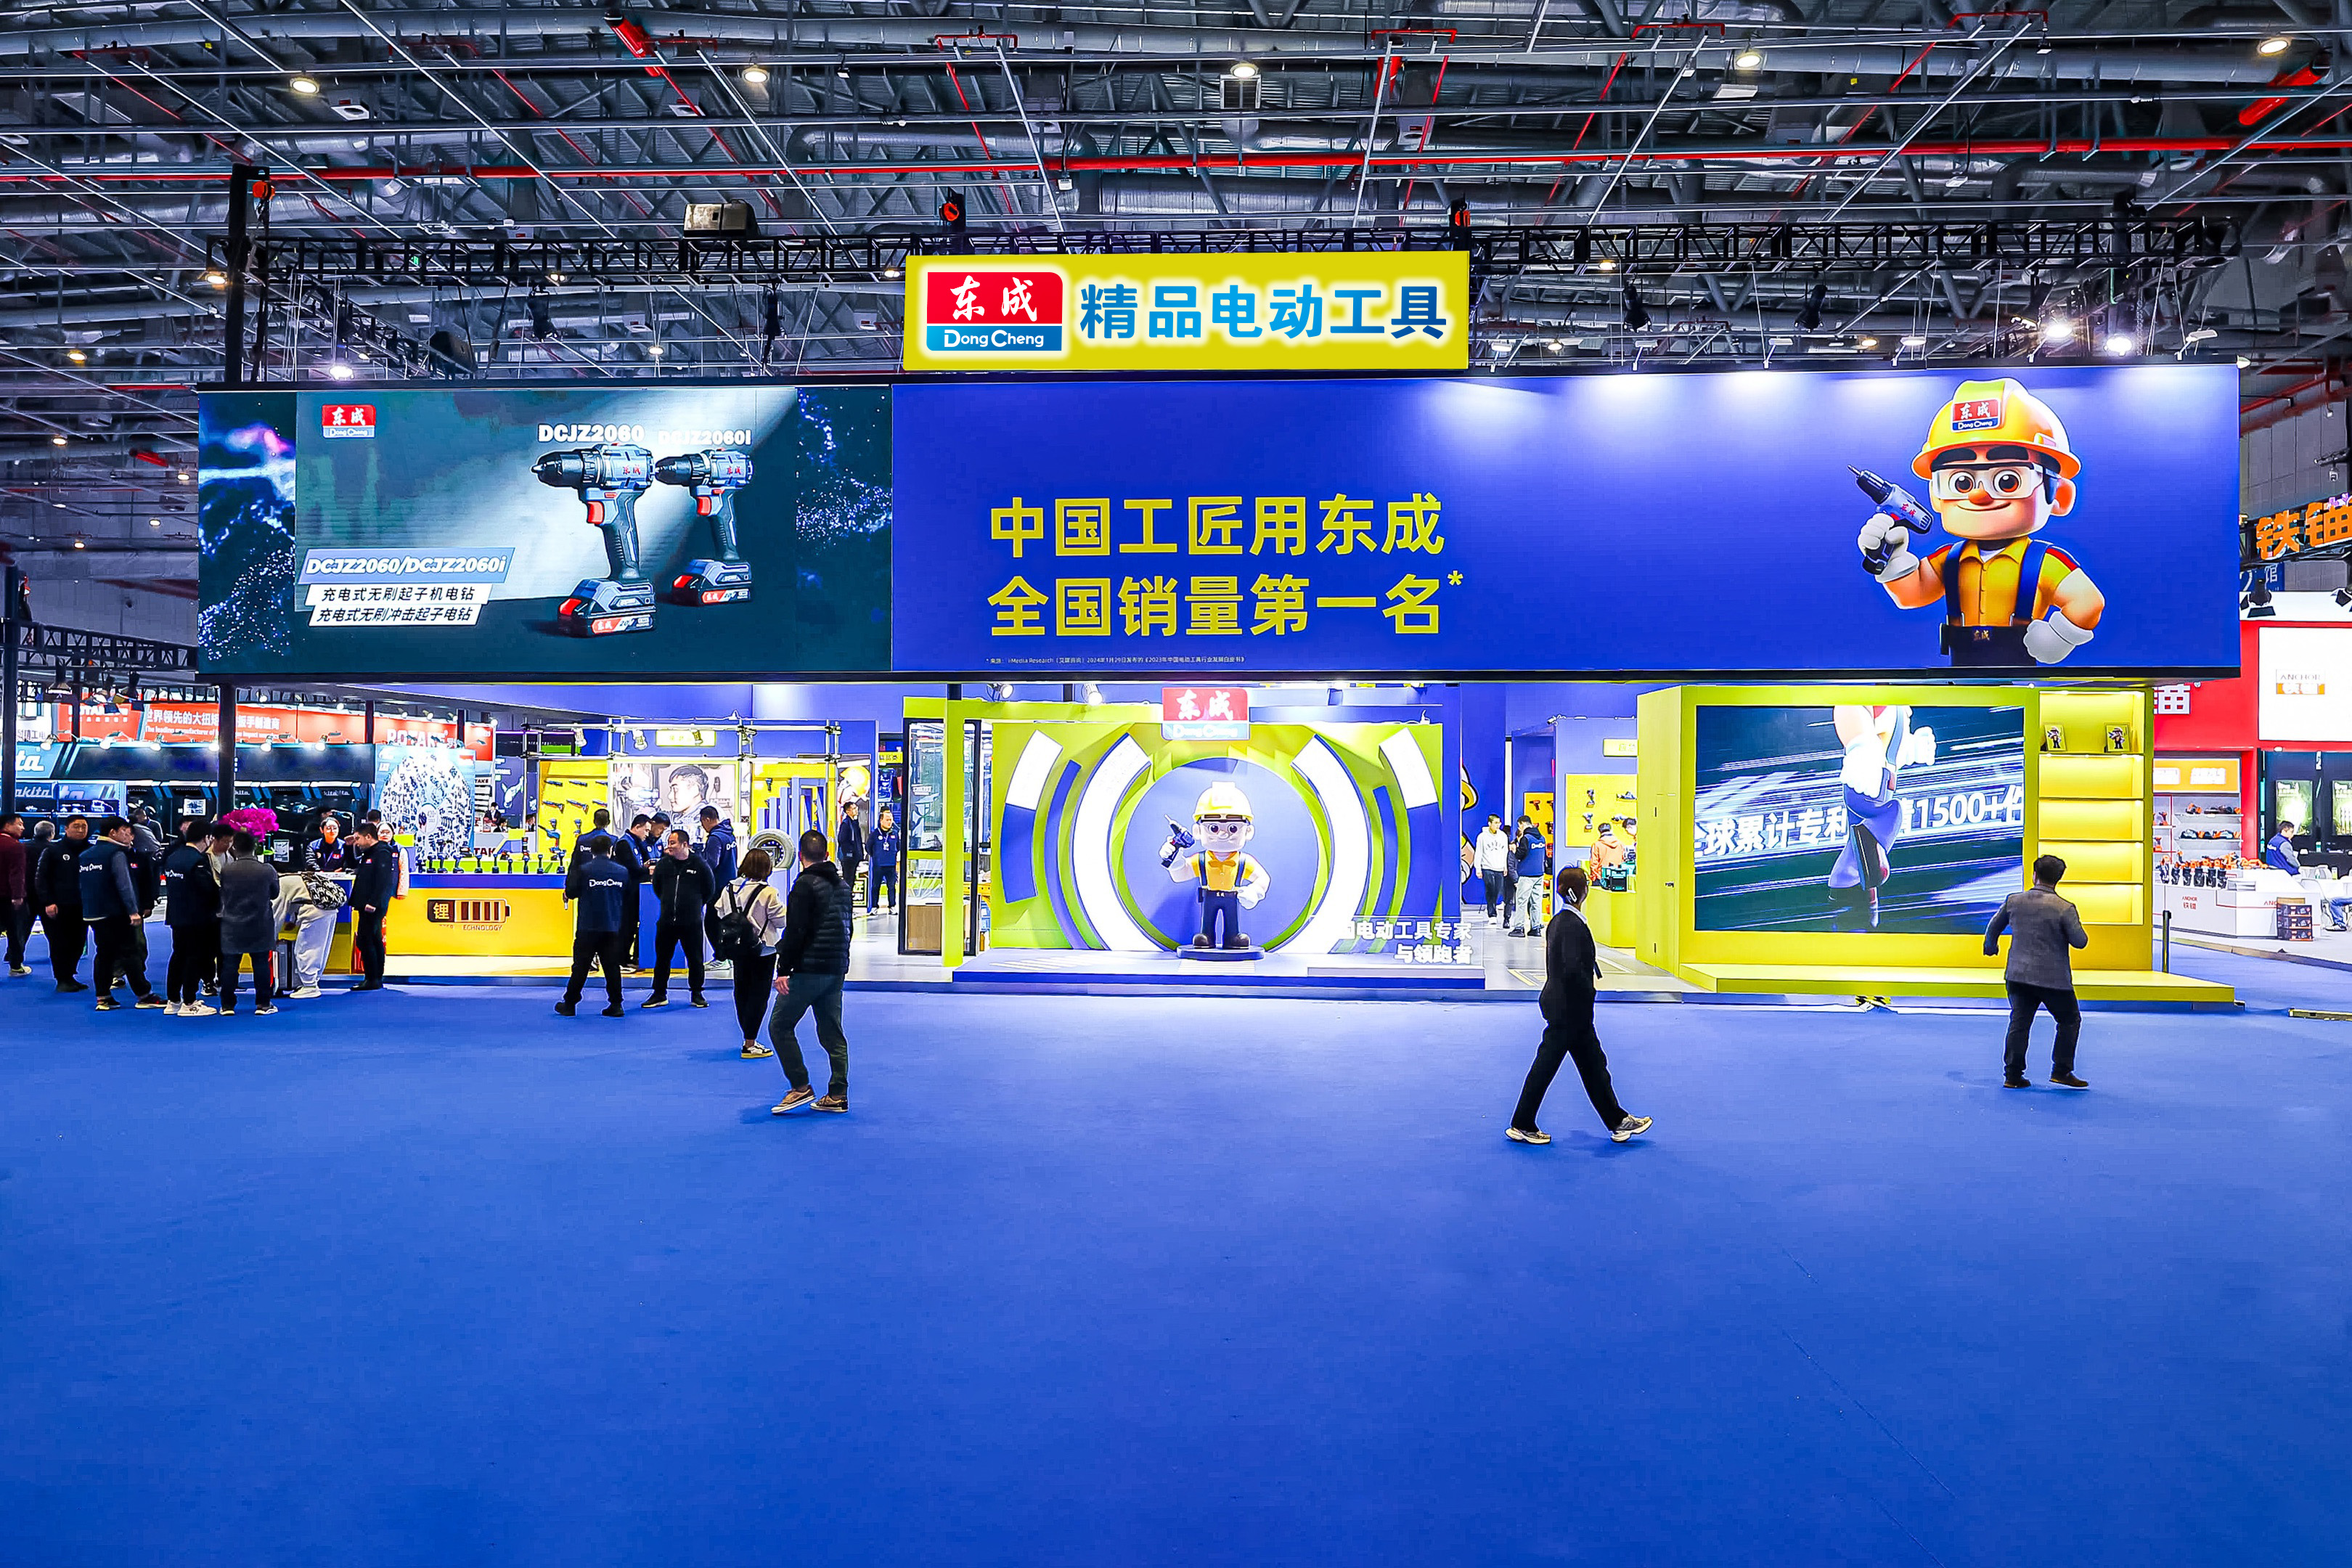 "New" Brand, "New" Product, "New" Journey! DongCheng Makes a Wonderful Appearance in China International Hardware Fair 